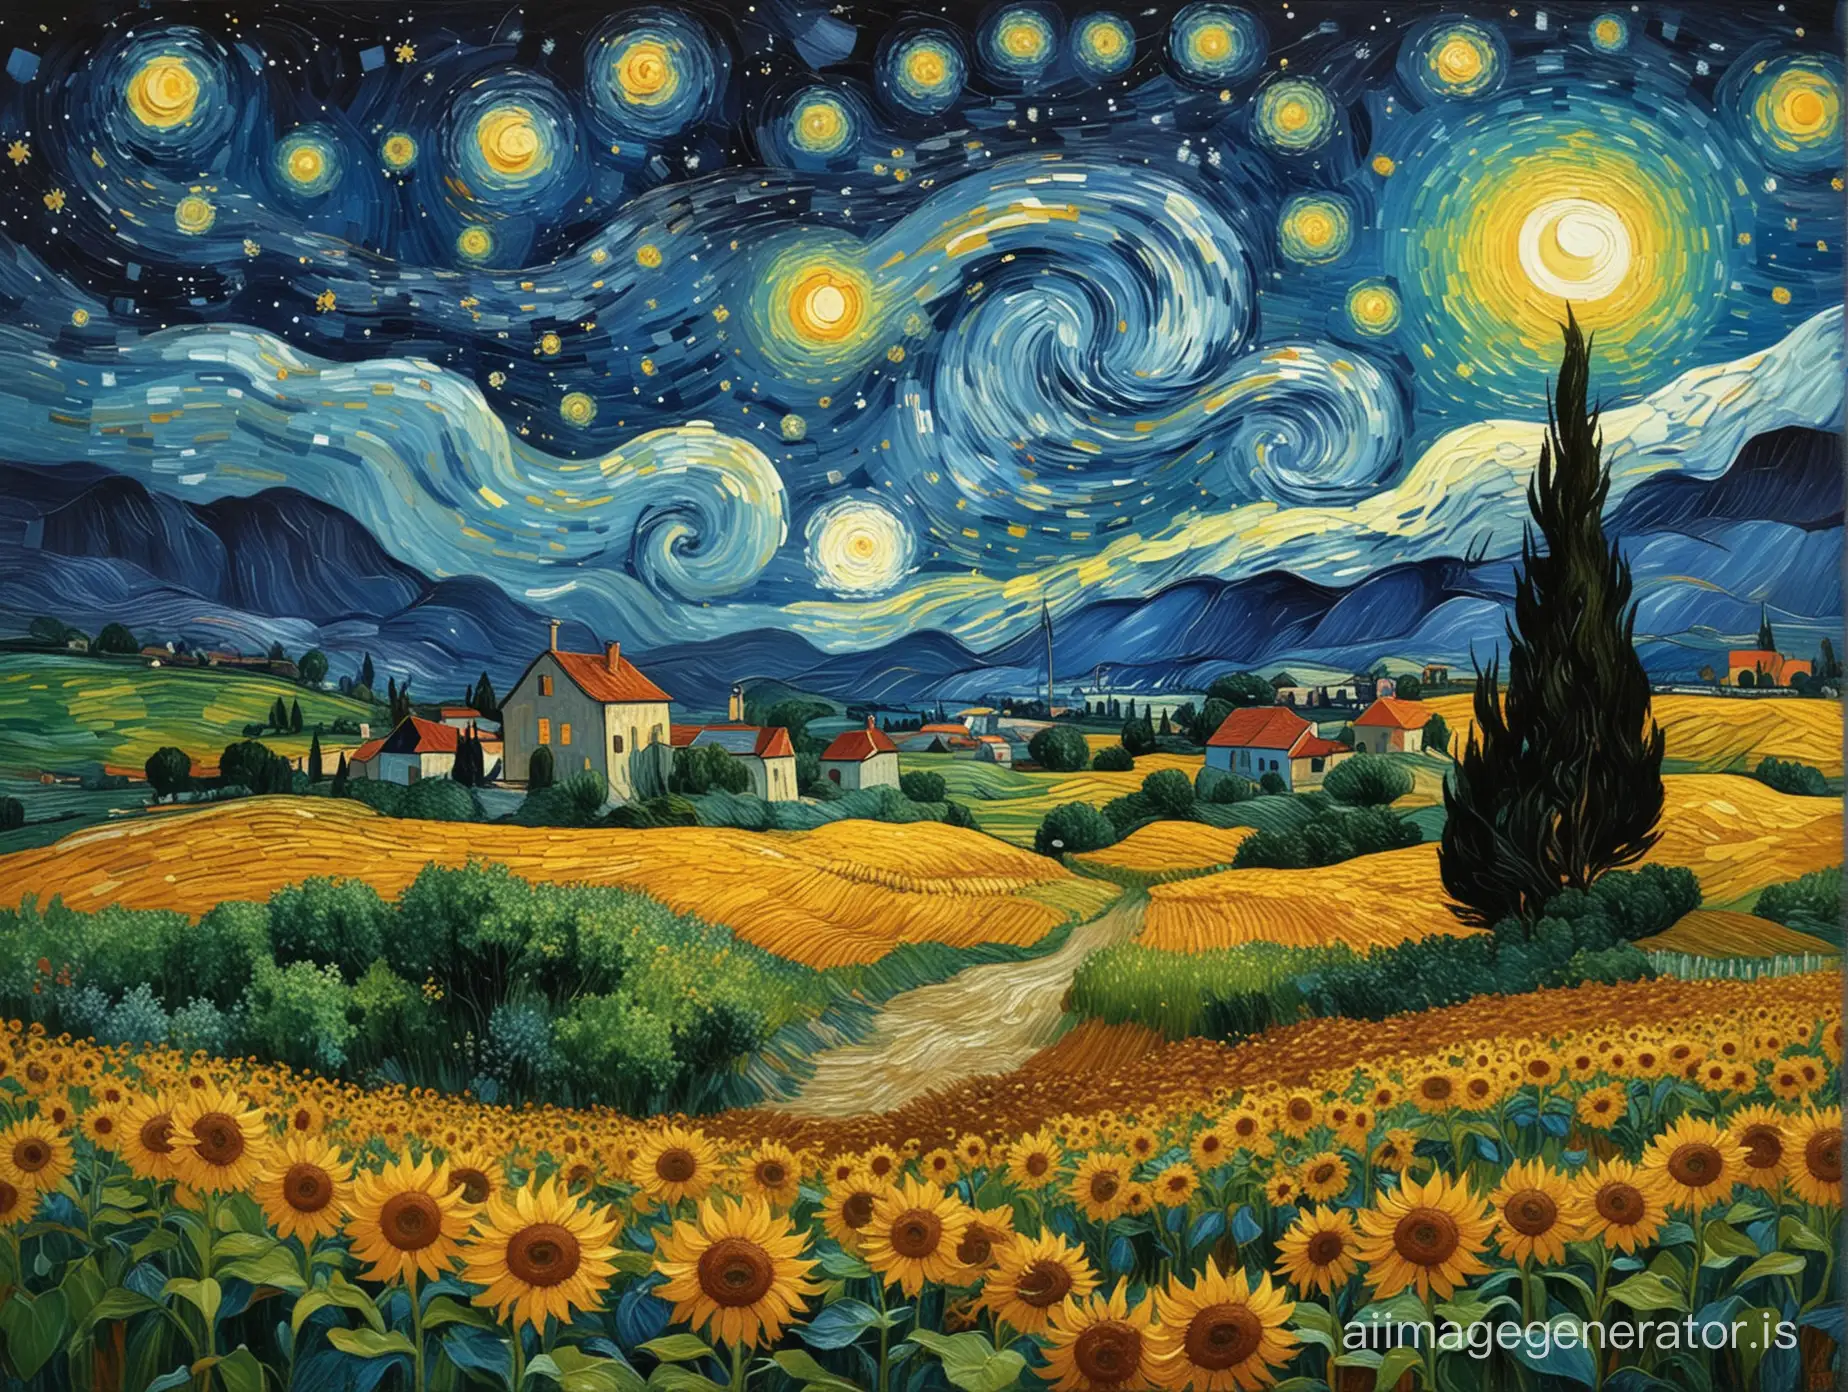 Vibrant-Van-Gogh-Inspired-Landscape-with-a-Single-Sunflower